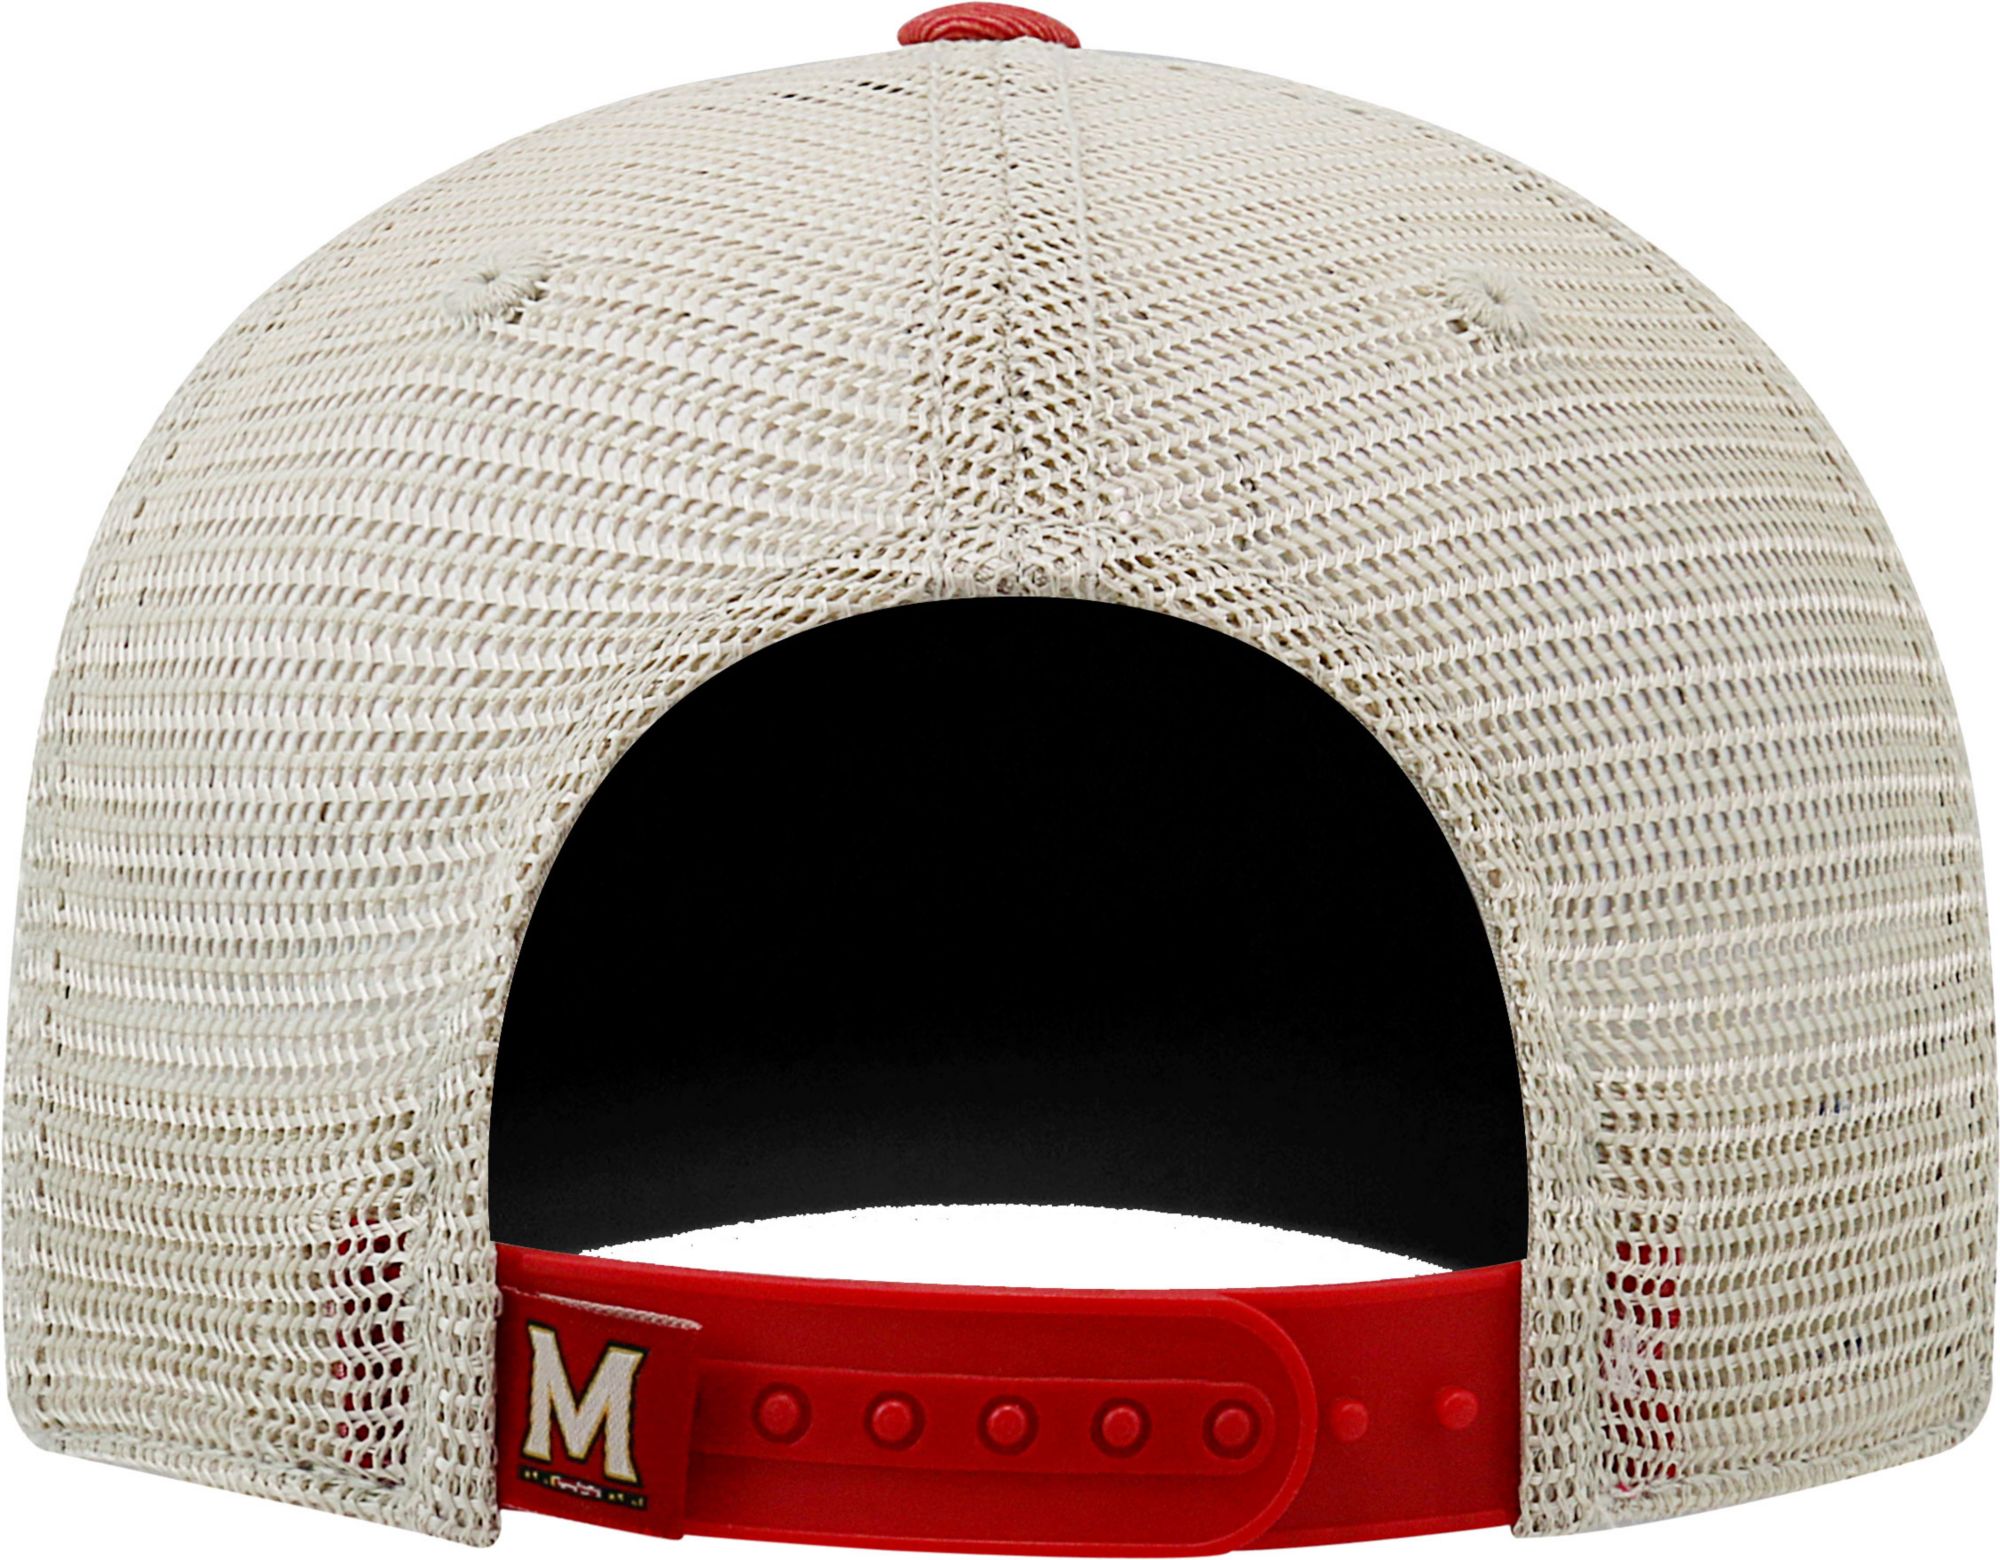 Top of the World Men's Maryland Terrapins Red/White/Black Off Road Adjustable Hat